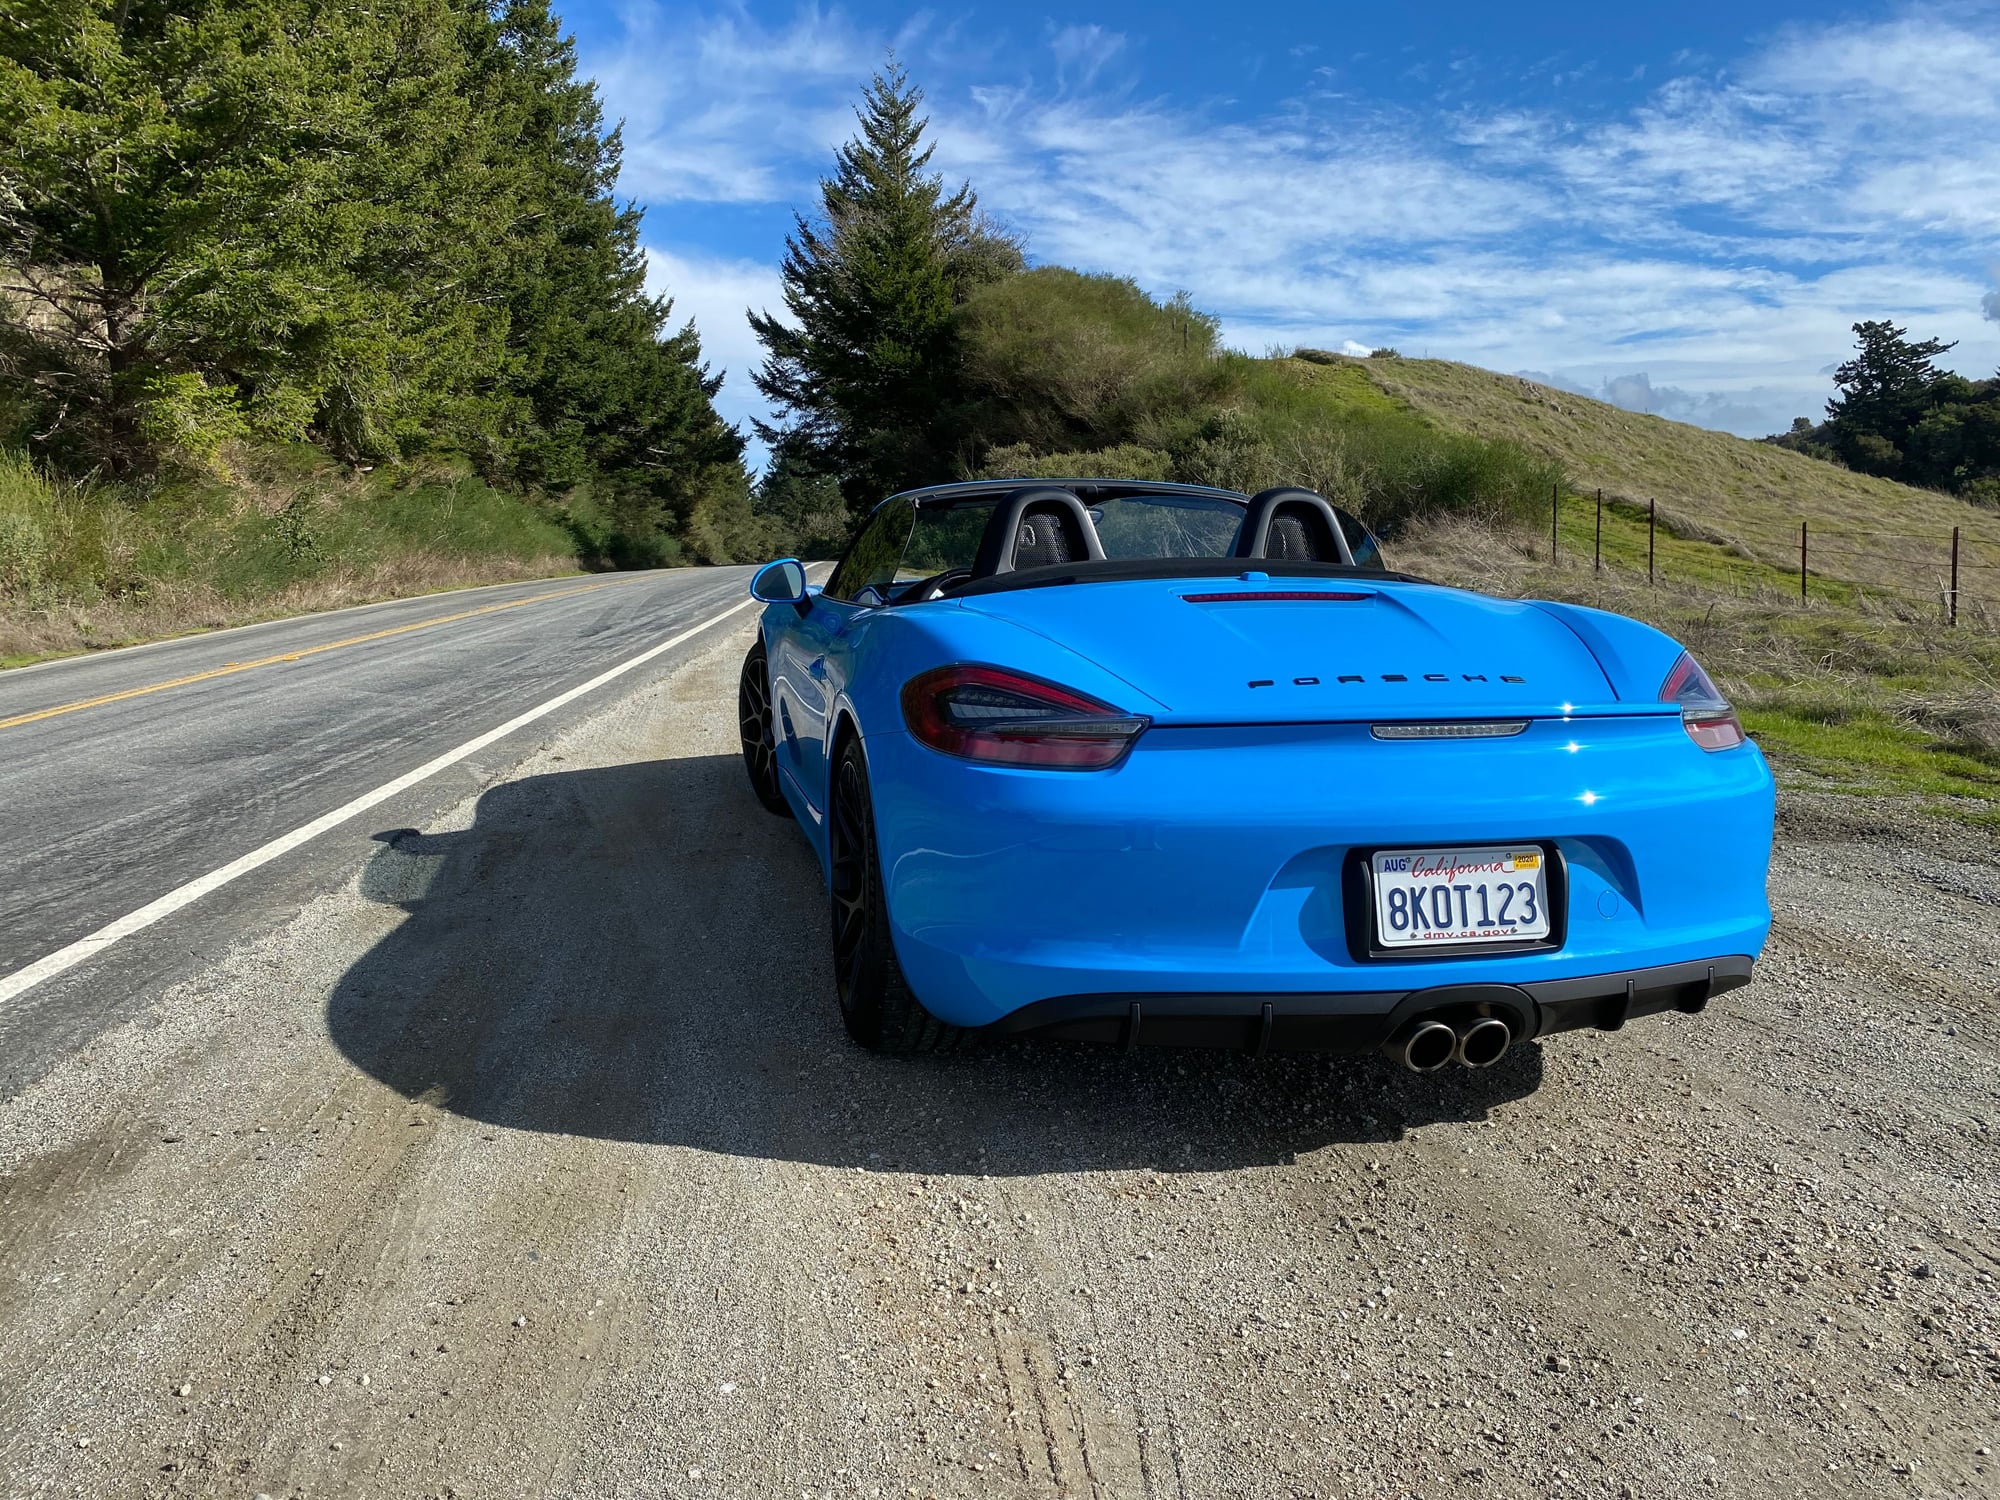 2013 Porsche Boxster - 2013 Porsche Boxster S // PTS Mexico Blue // X73 // 6 SP Manual - Used - VIN WP0CB2A87DS133811 - 26,100 Miles - 6 cyl - 2WD - Manual - Convertible - Blue - South San Francisco, CA 94080, United States